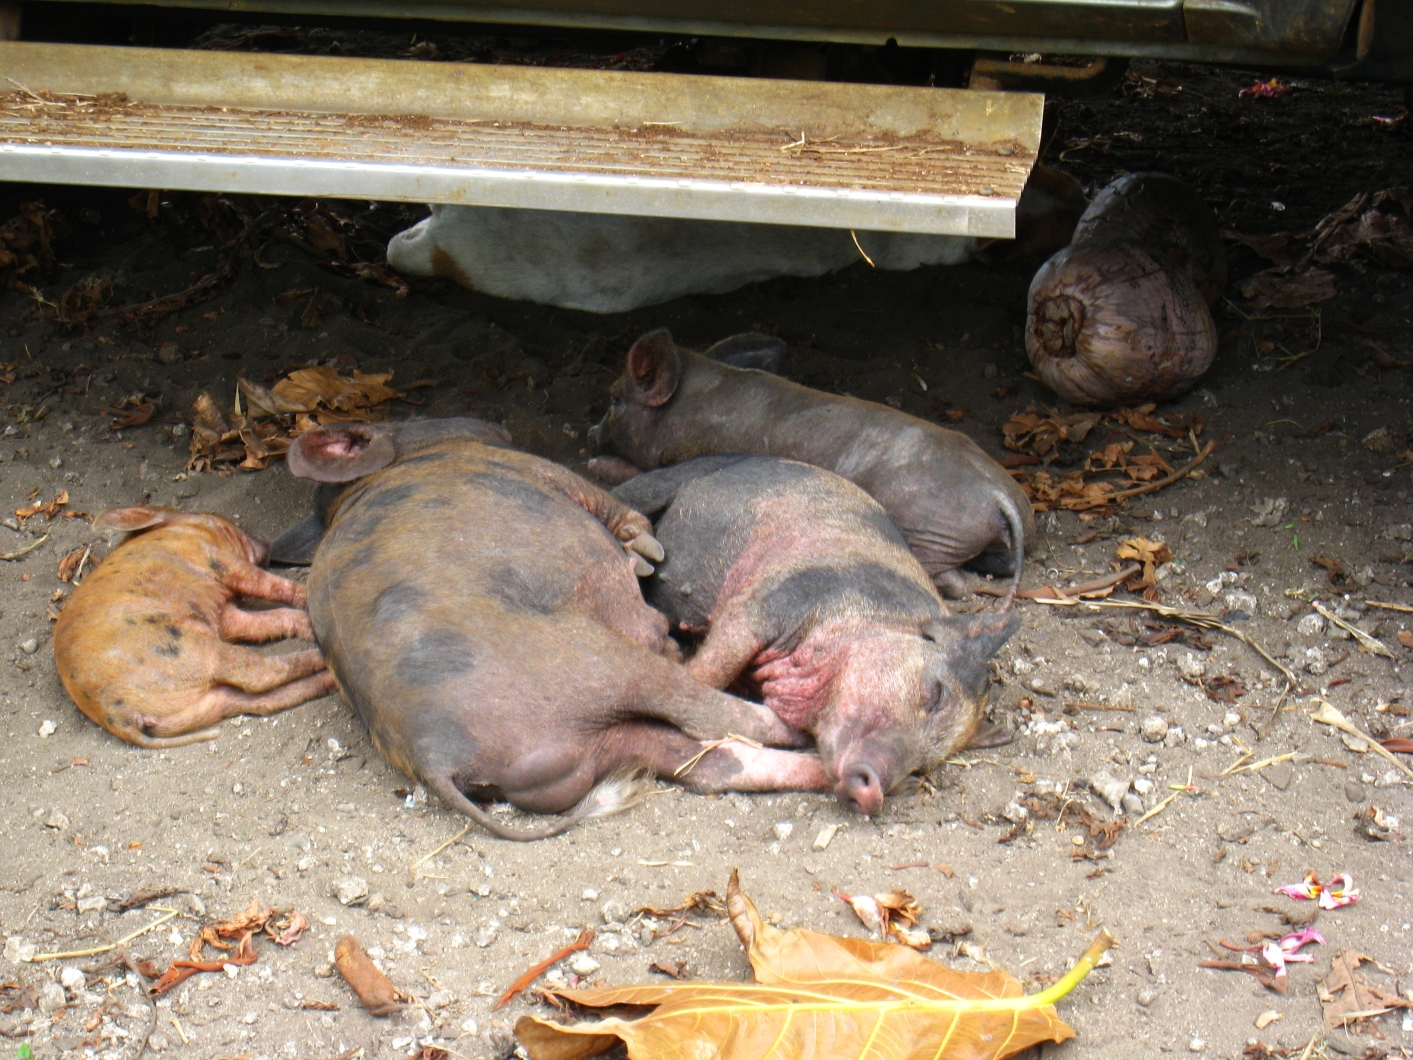 Pigs sleeping under a car in the heat of the day.